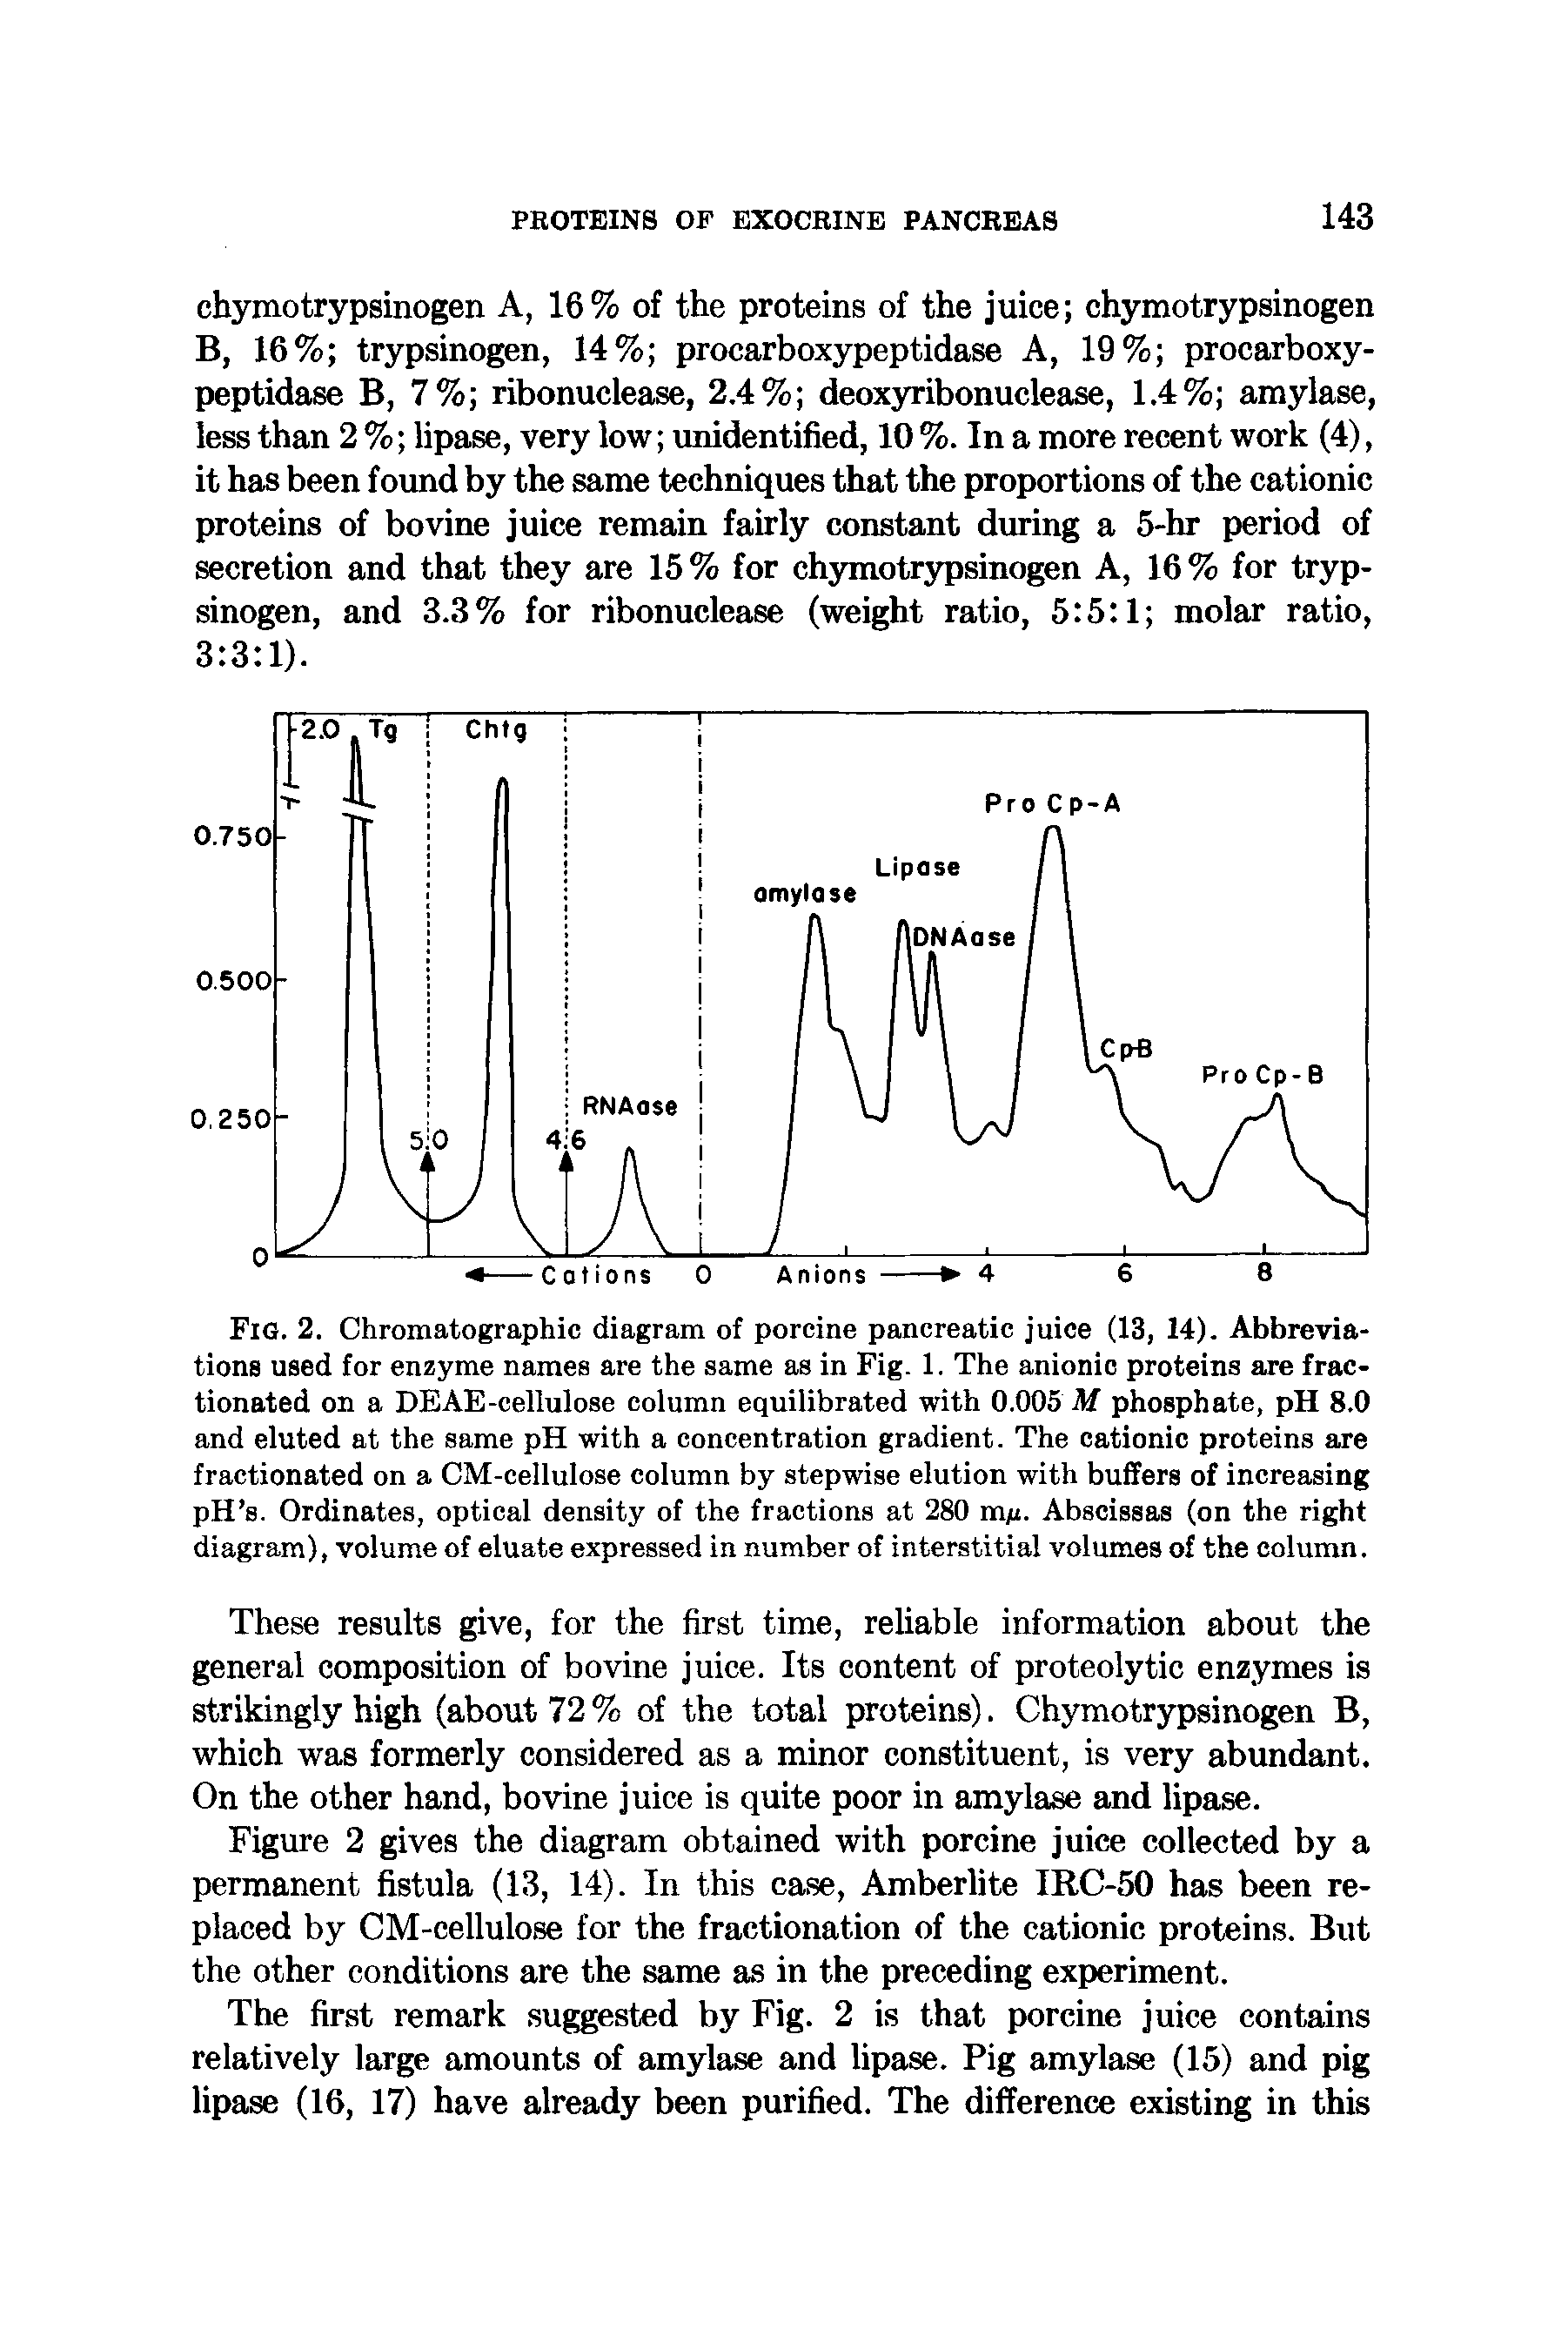 Fig. 2. Chromatographic diagram of porcine pancreatic juice (13, 14). Abbreviations used for enzyme names are the same as in Fig. 1. The anionic proteins are fractionated on a DEAE-cellulose column equilibrated with 0.005 M phosphate, pH 8.0 and eluted at the same pH with a concentration gradient. The cationic proteins are fractionated on a CM-celluIose column by stepwise elution with buffers of increasing pH s. Ordinates, optical density of the fractions at 280 m/j. Abscissas (on the right diagram), volume of eluate expressed in number of interstitial volumes of the column.